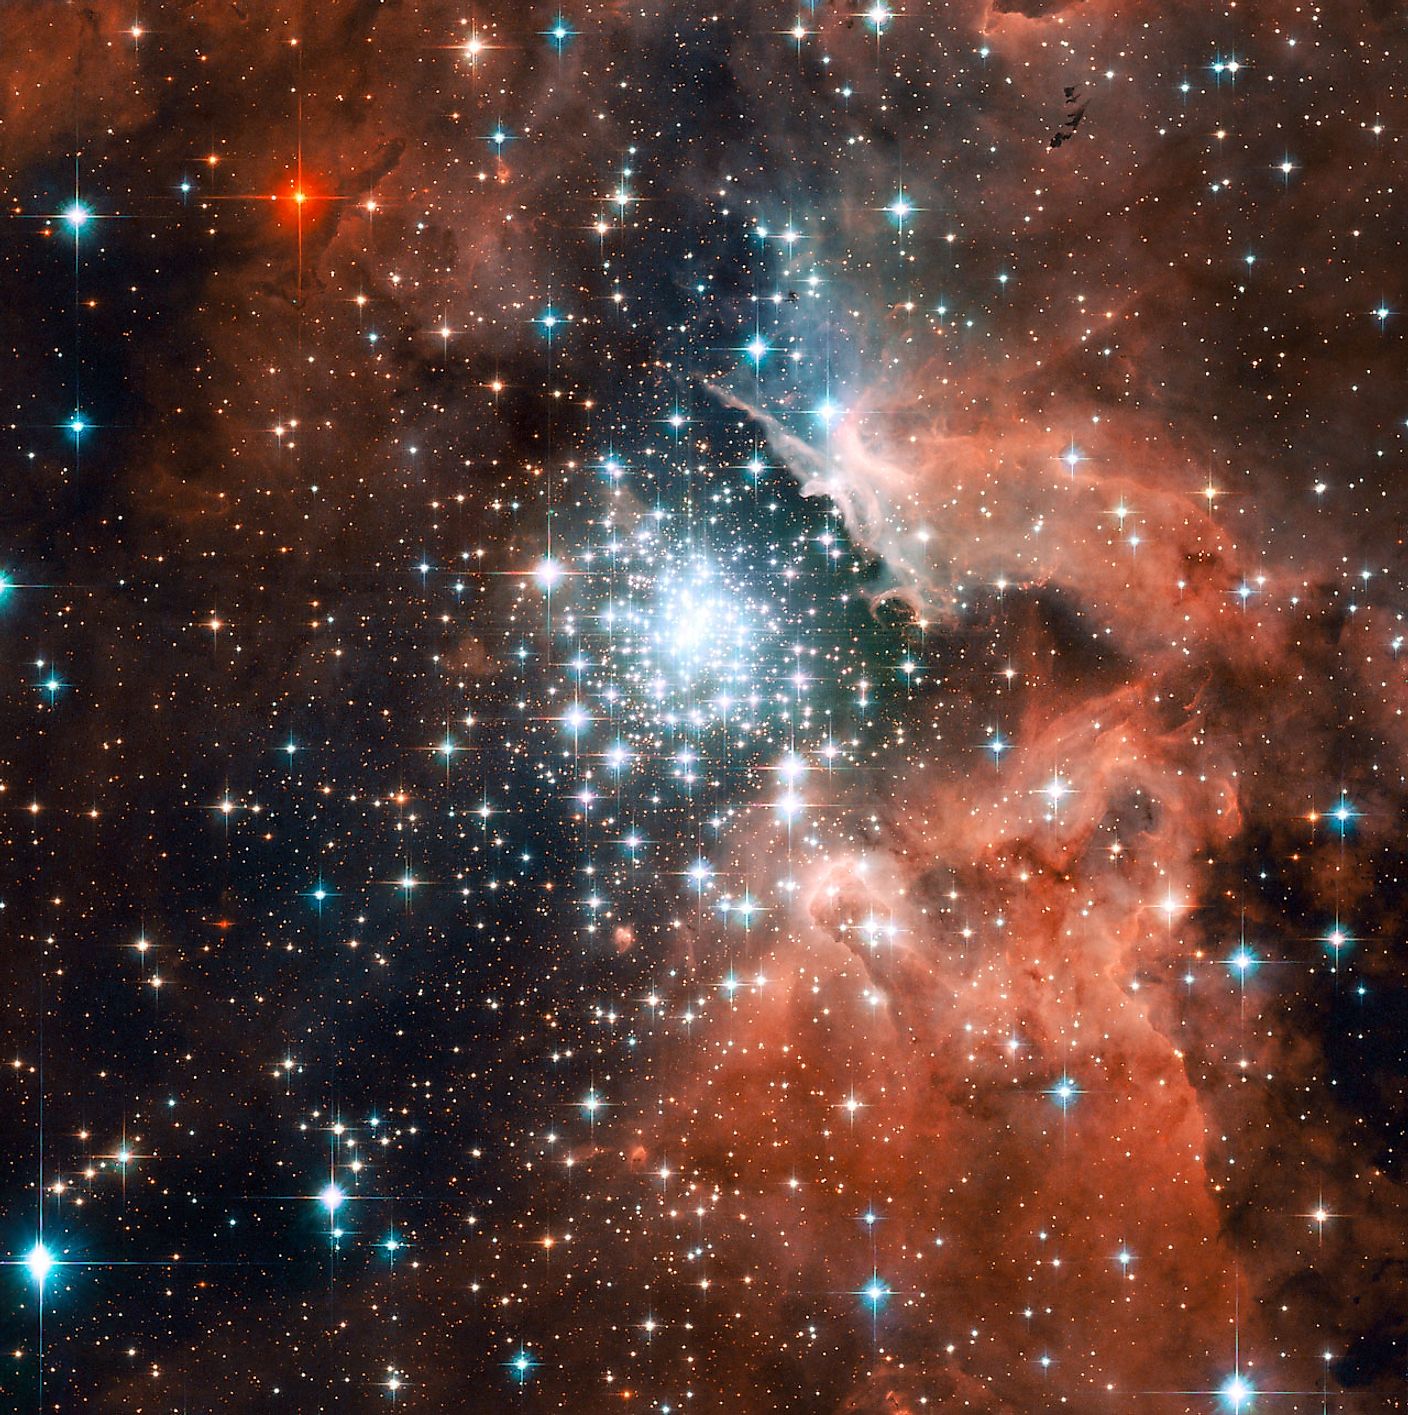 Hubble image of an open star cluster. Image credit: NASA/ESA